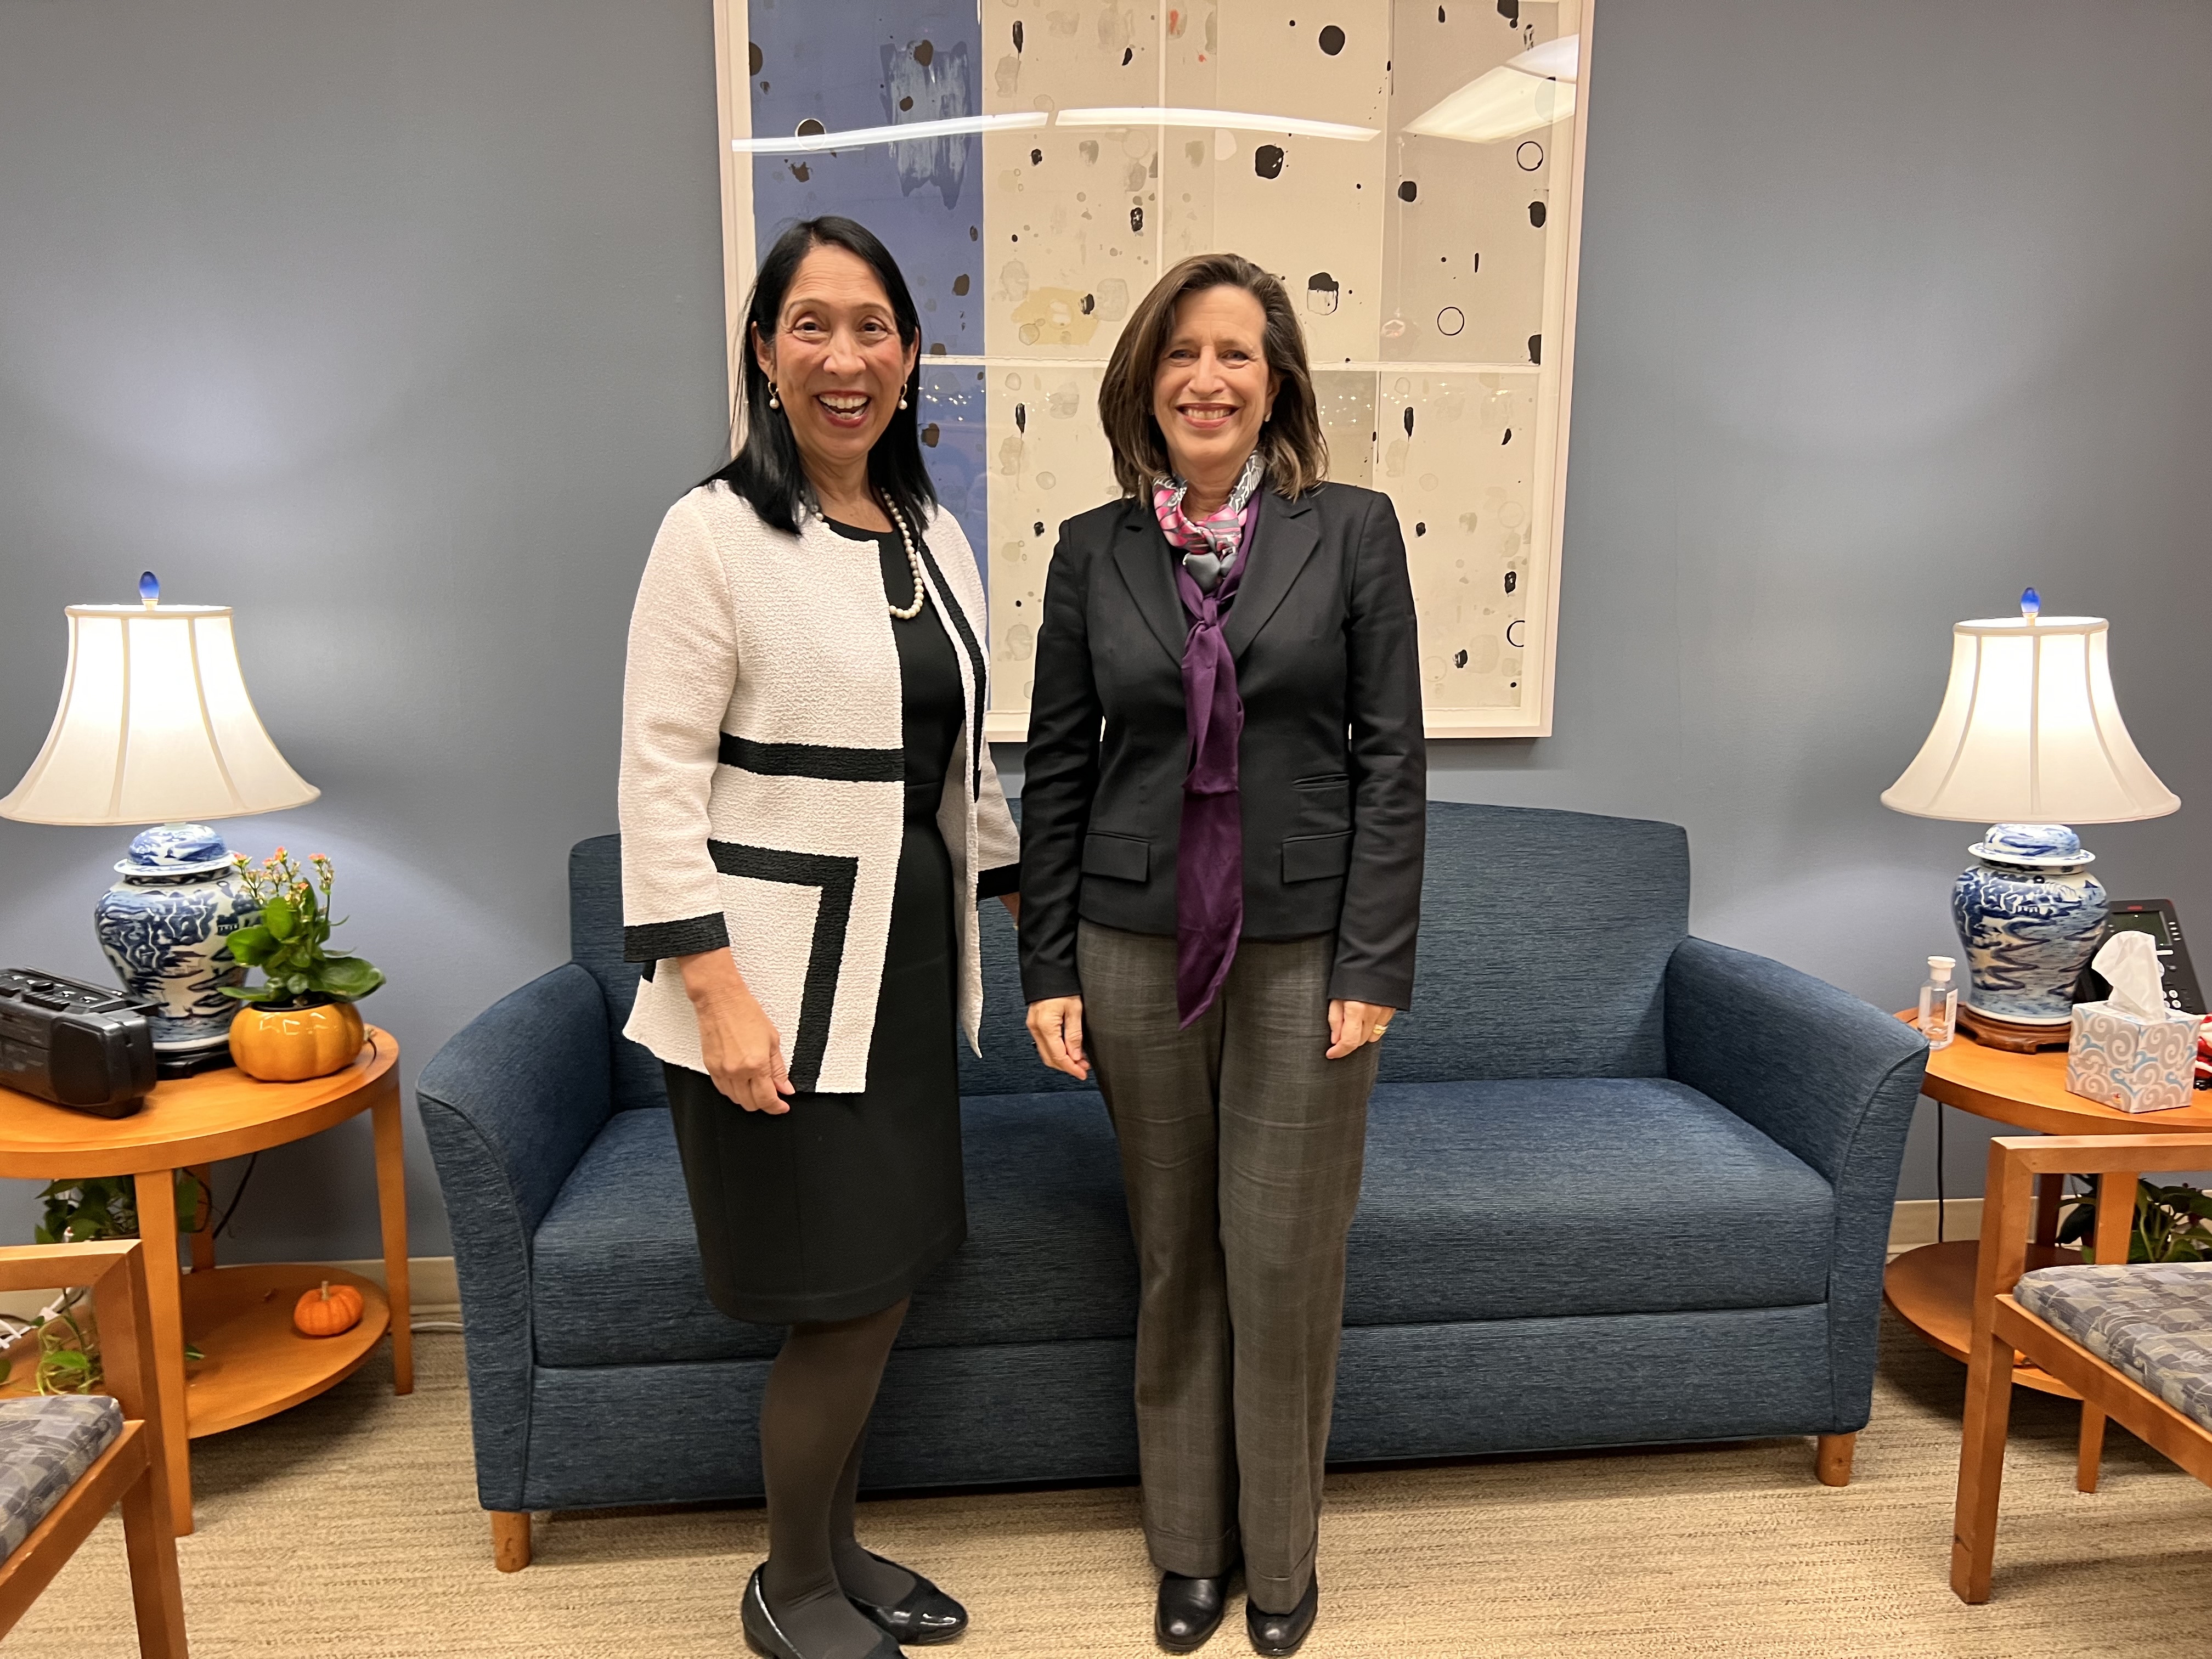 Amb. Michele J. Sison, Assistant Secretary of State for International Organization Affairs (left), and Melissa Fleming, UN Under-Secretary-General for Global Communications (right).